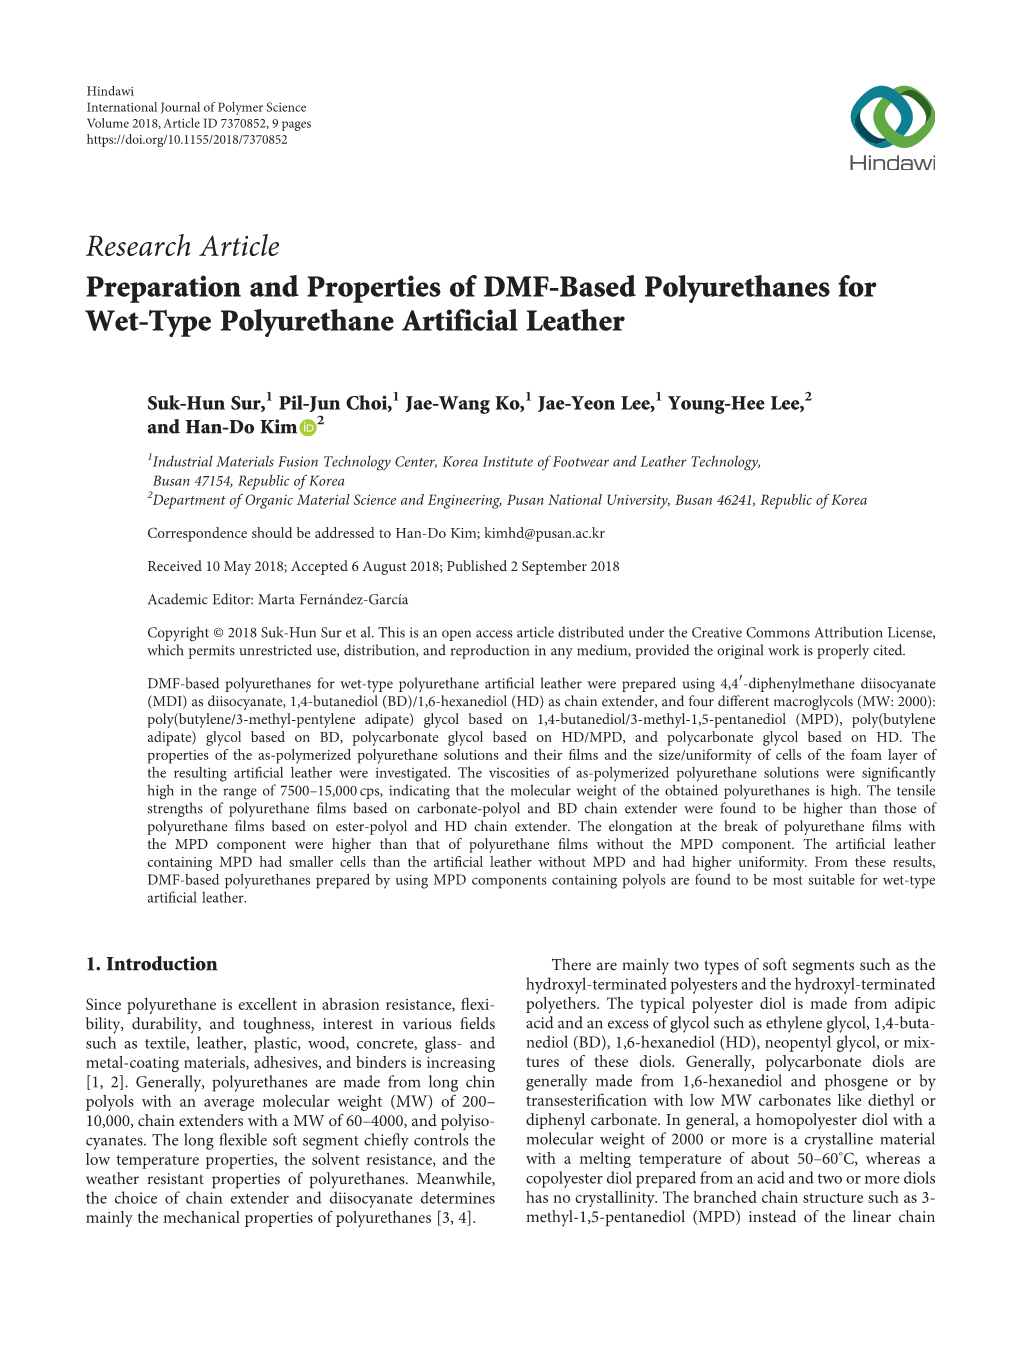 Research Article Preparation and Properties of DMF-Based Polyurethanes for Wet-Type Polyurethane Artificial Leather